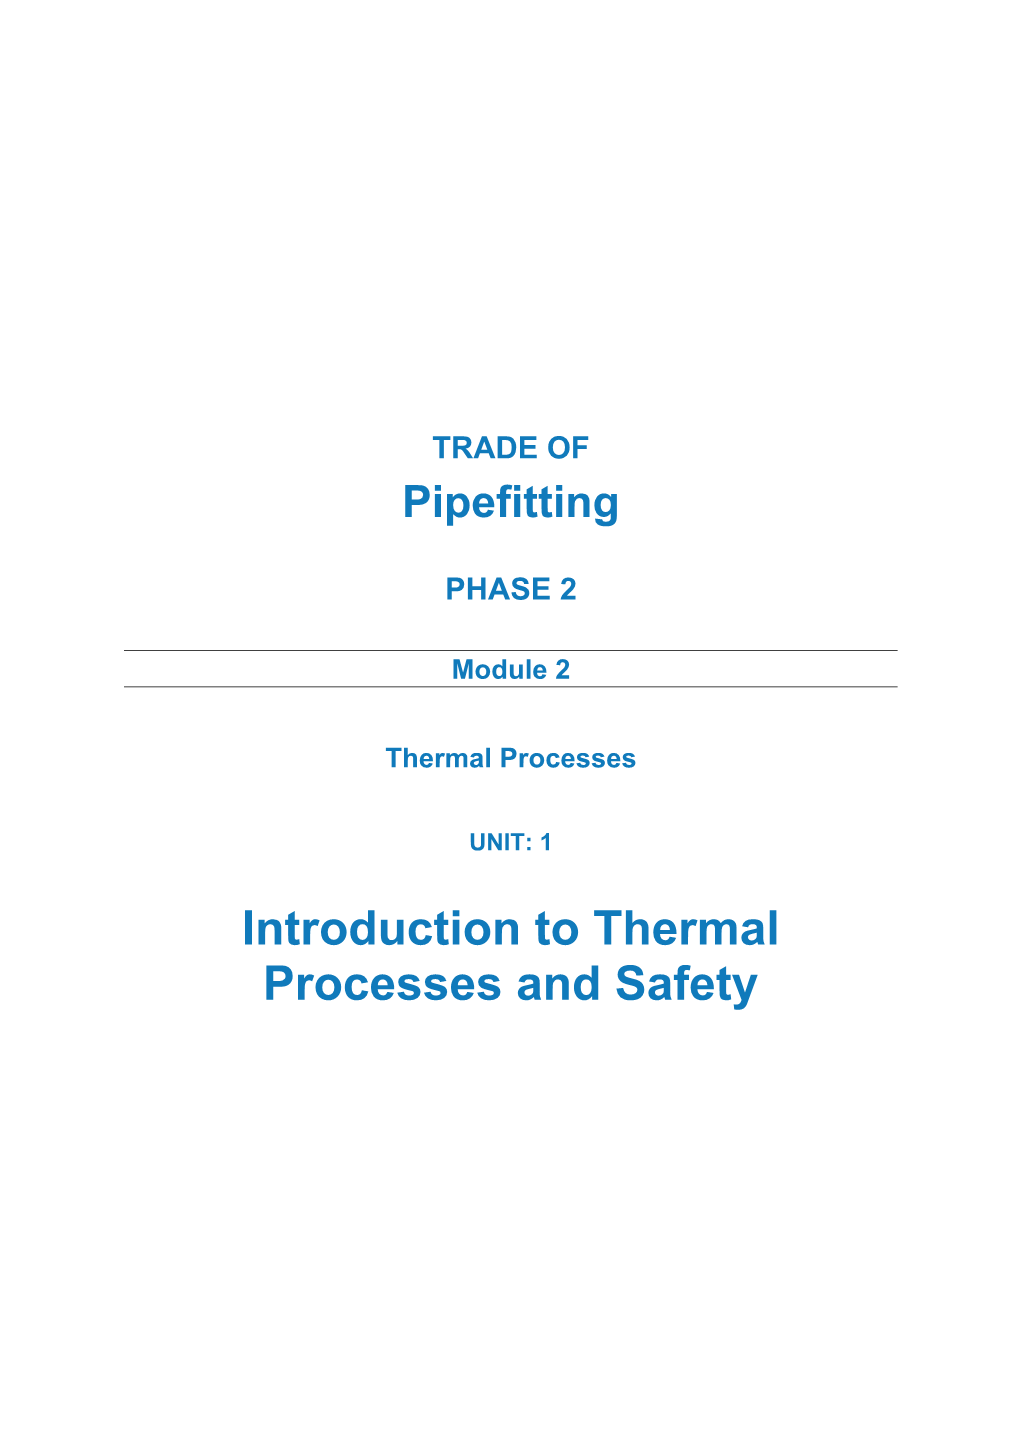 Introduction to Thermal Processes and Safety